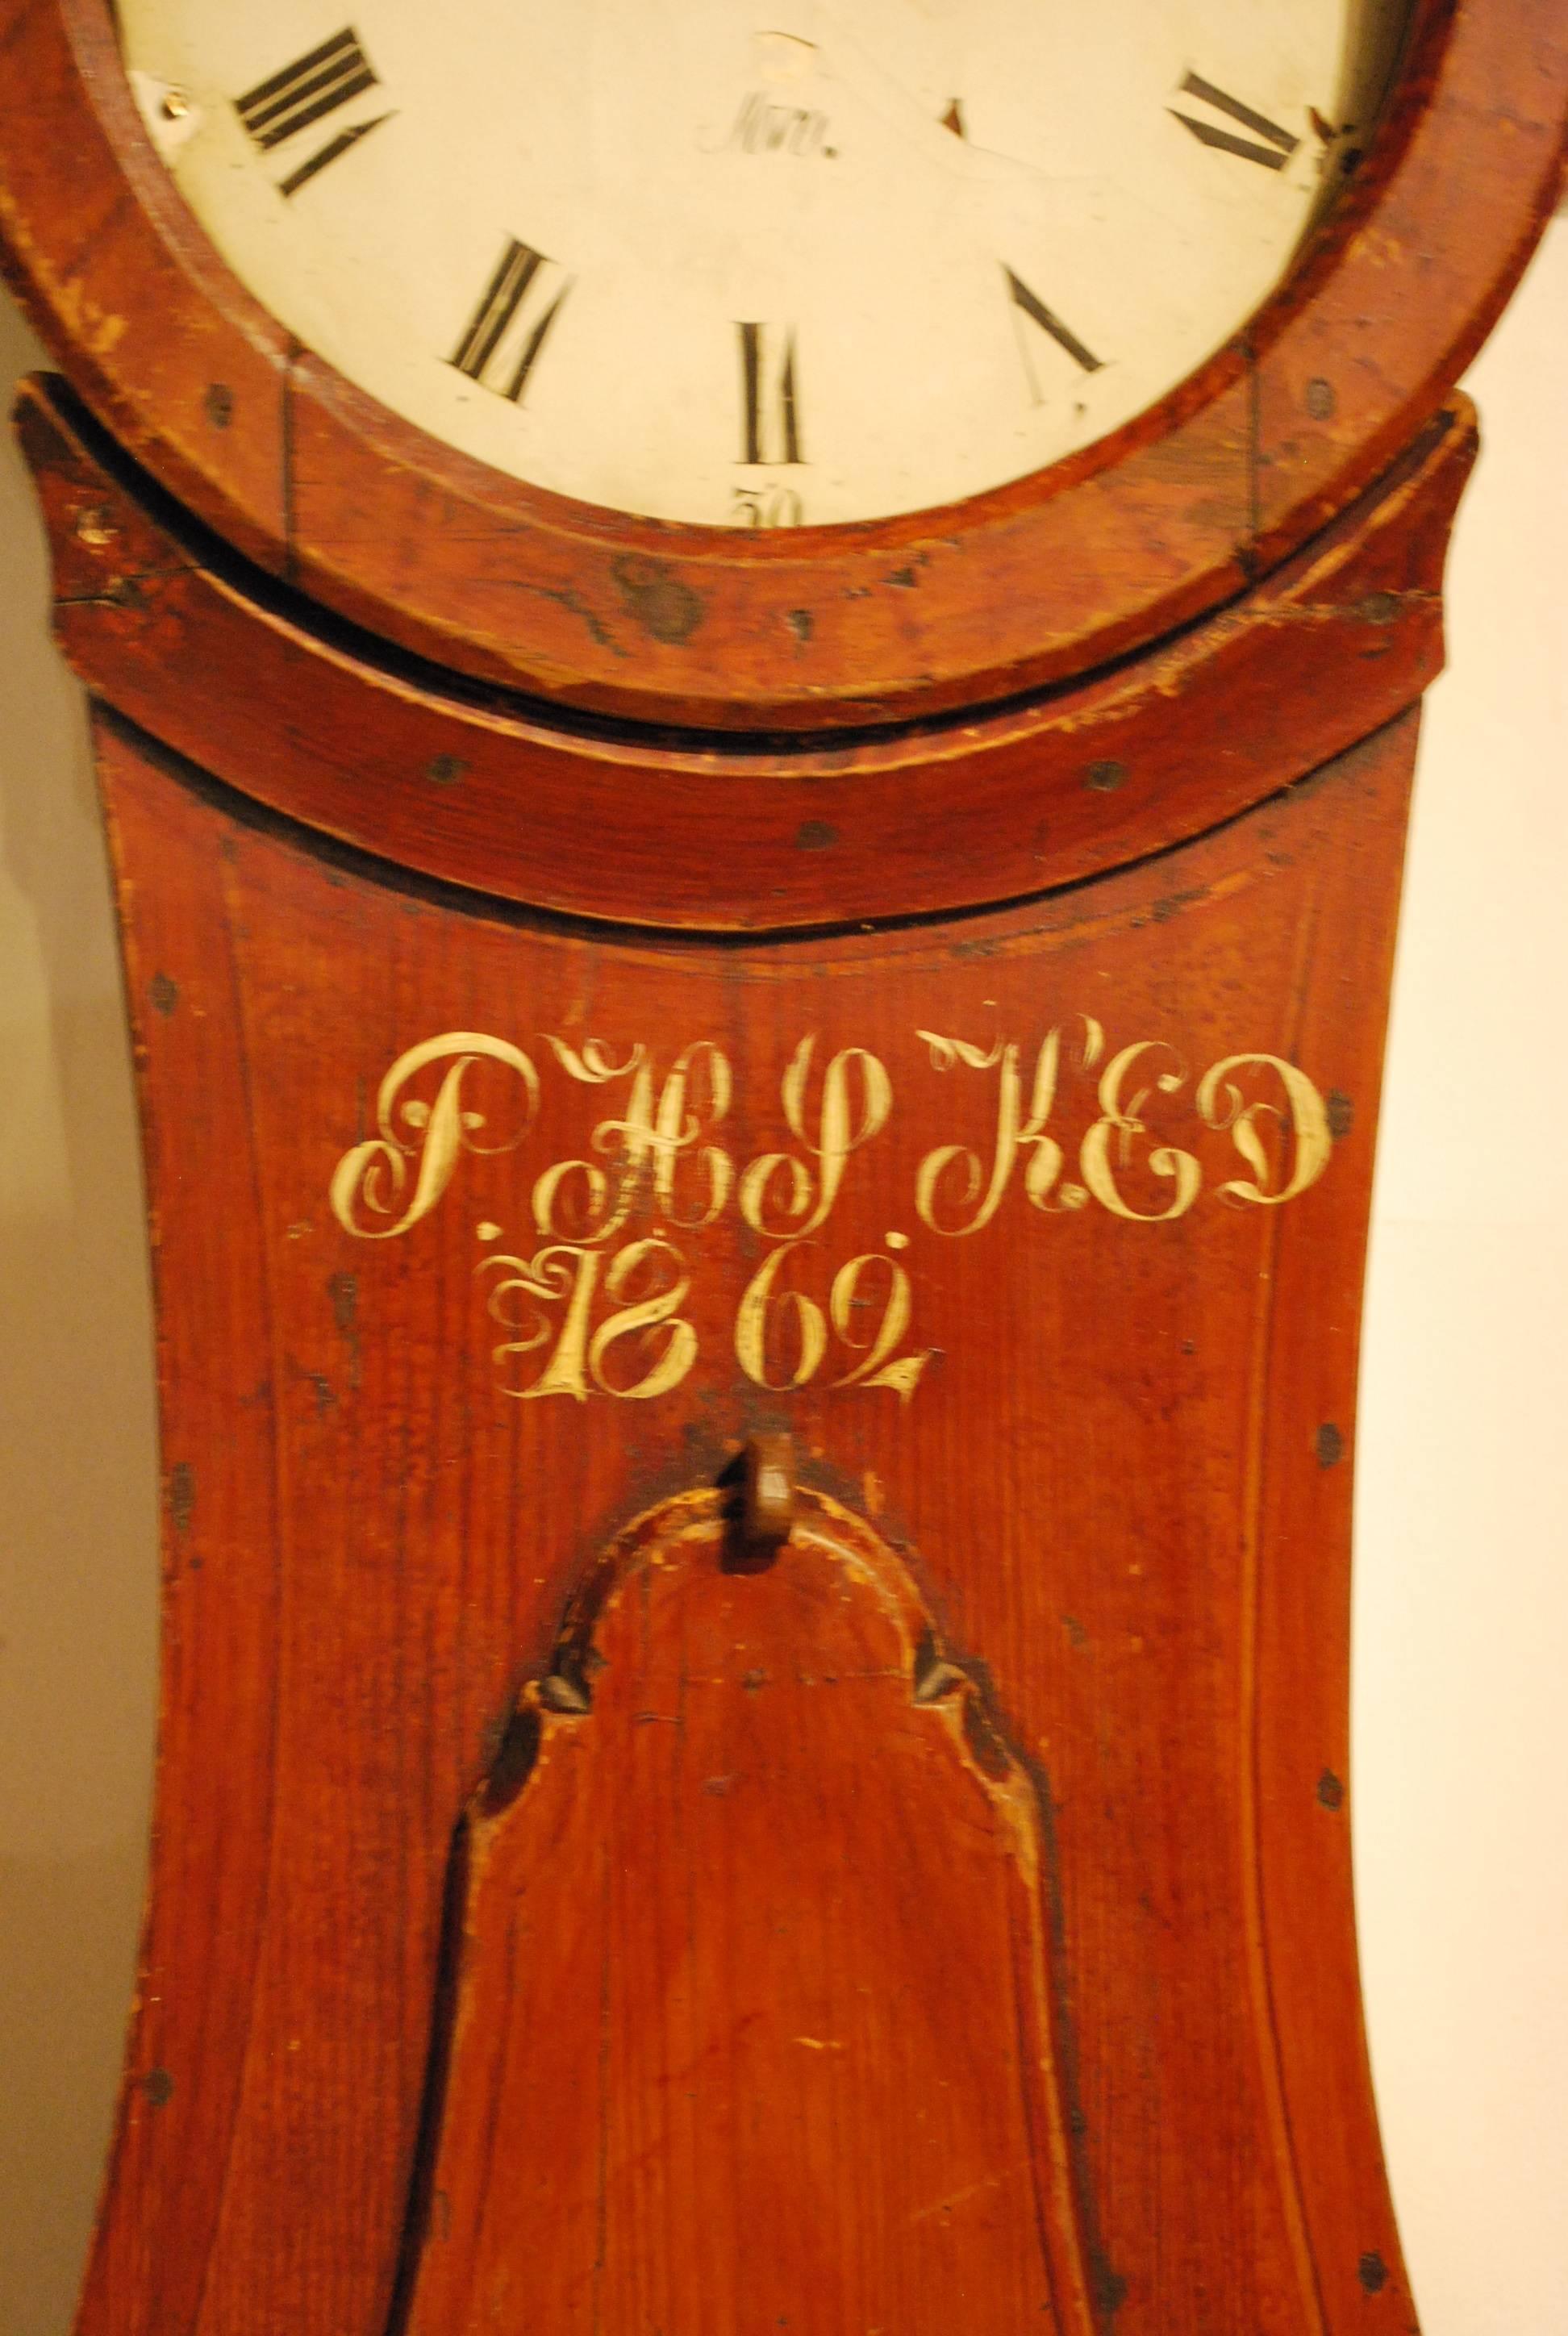 An unusual untouched Swedish Mora wedding clock in original condition. This is one of the rare Mora clock that was never over painted or 'update' over the last 154 years. Note the original pegs, lack of glass and the loss of original paint is